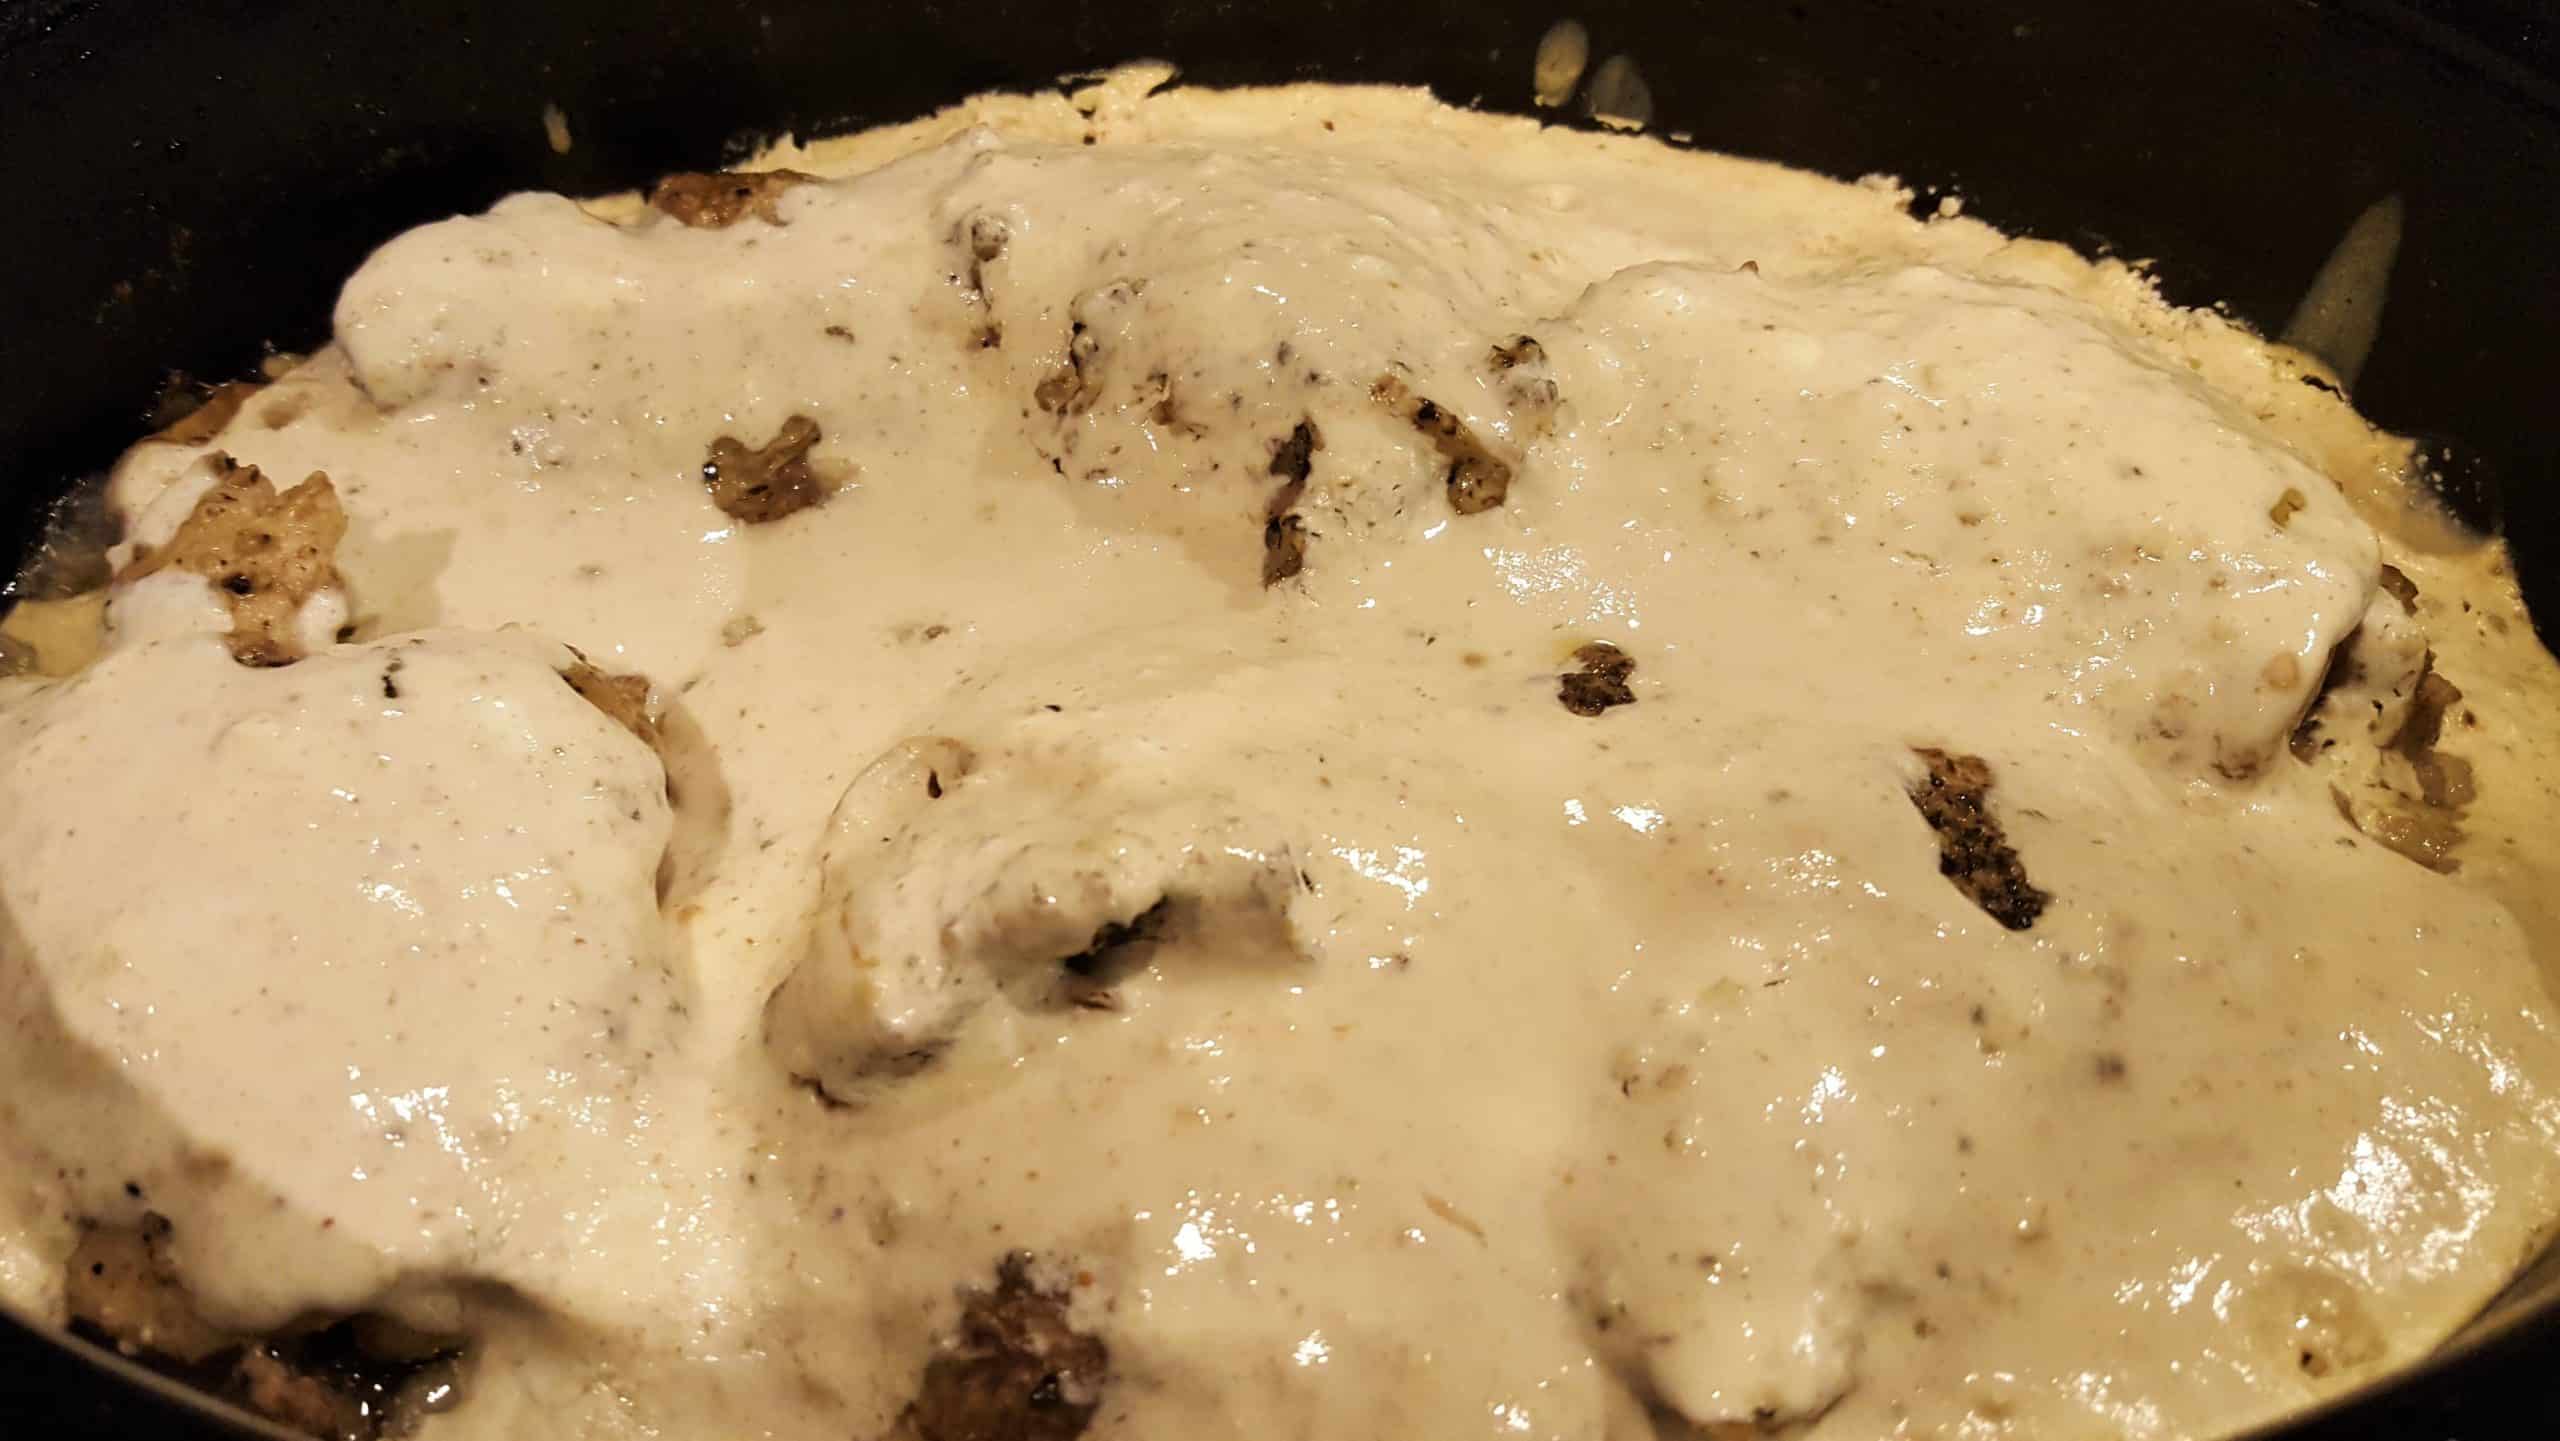 Creamy Garlic Sauce Smothered over Chicken Thighs and Rice - Dining in with Danielle